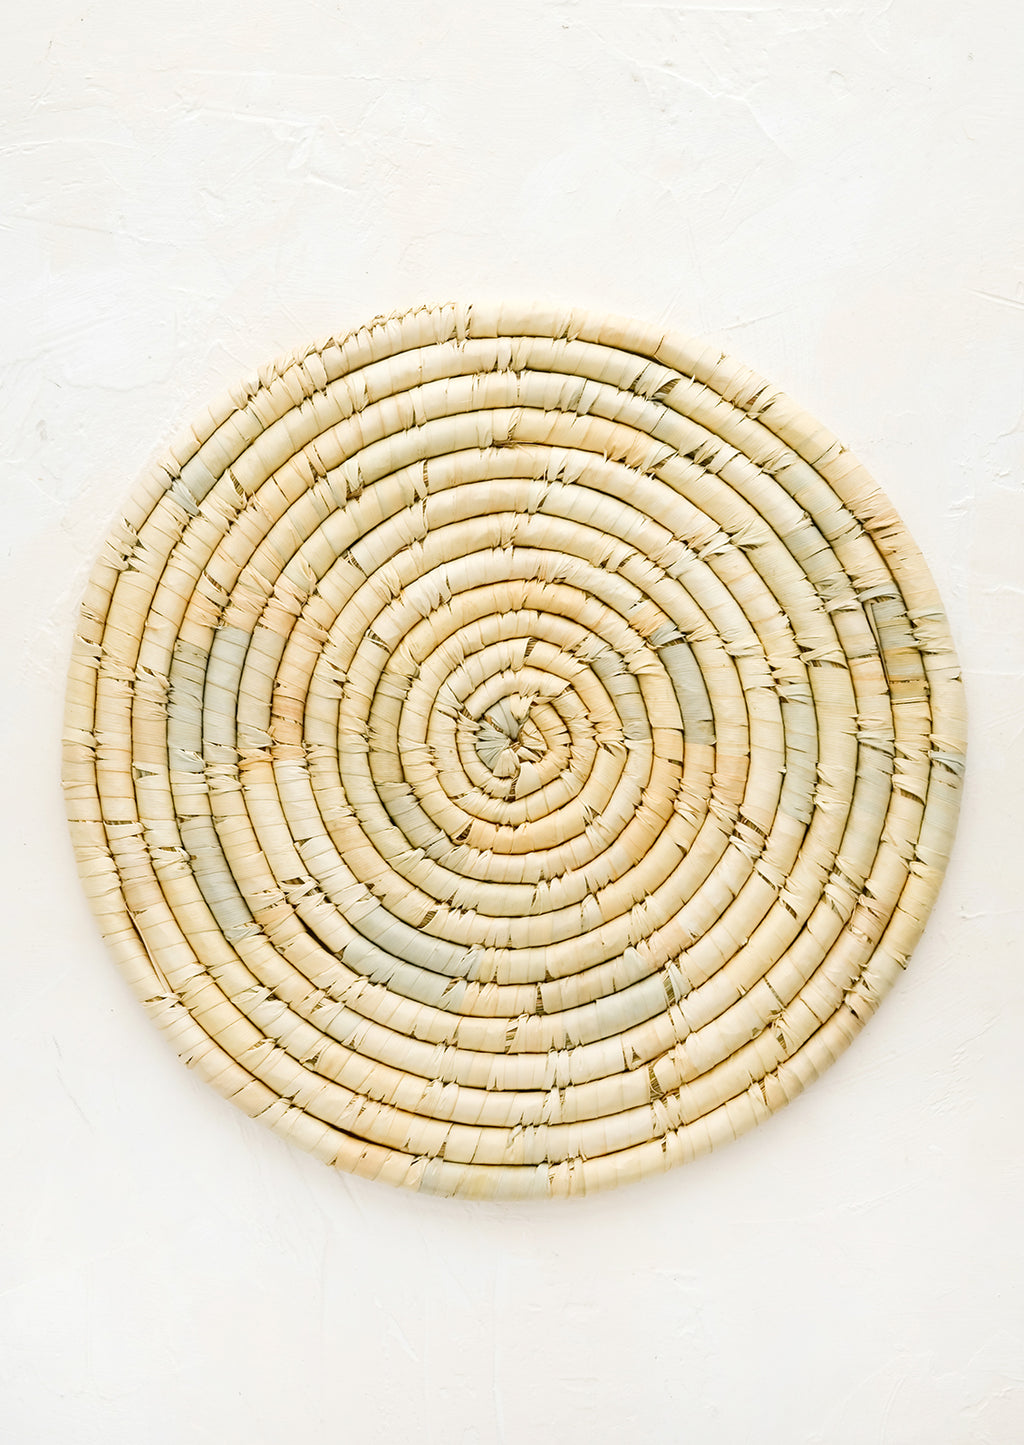 1: A round placemat made from natural dried straw.